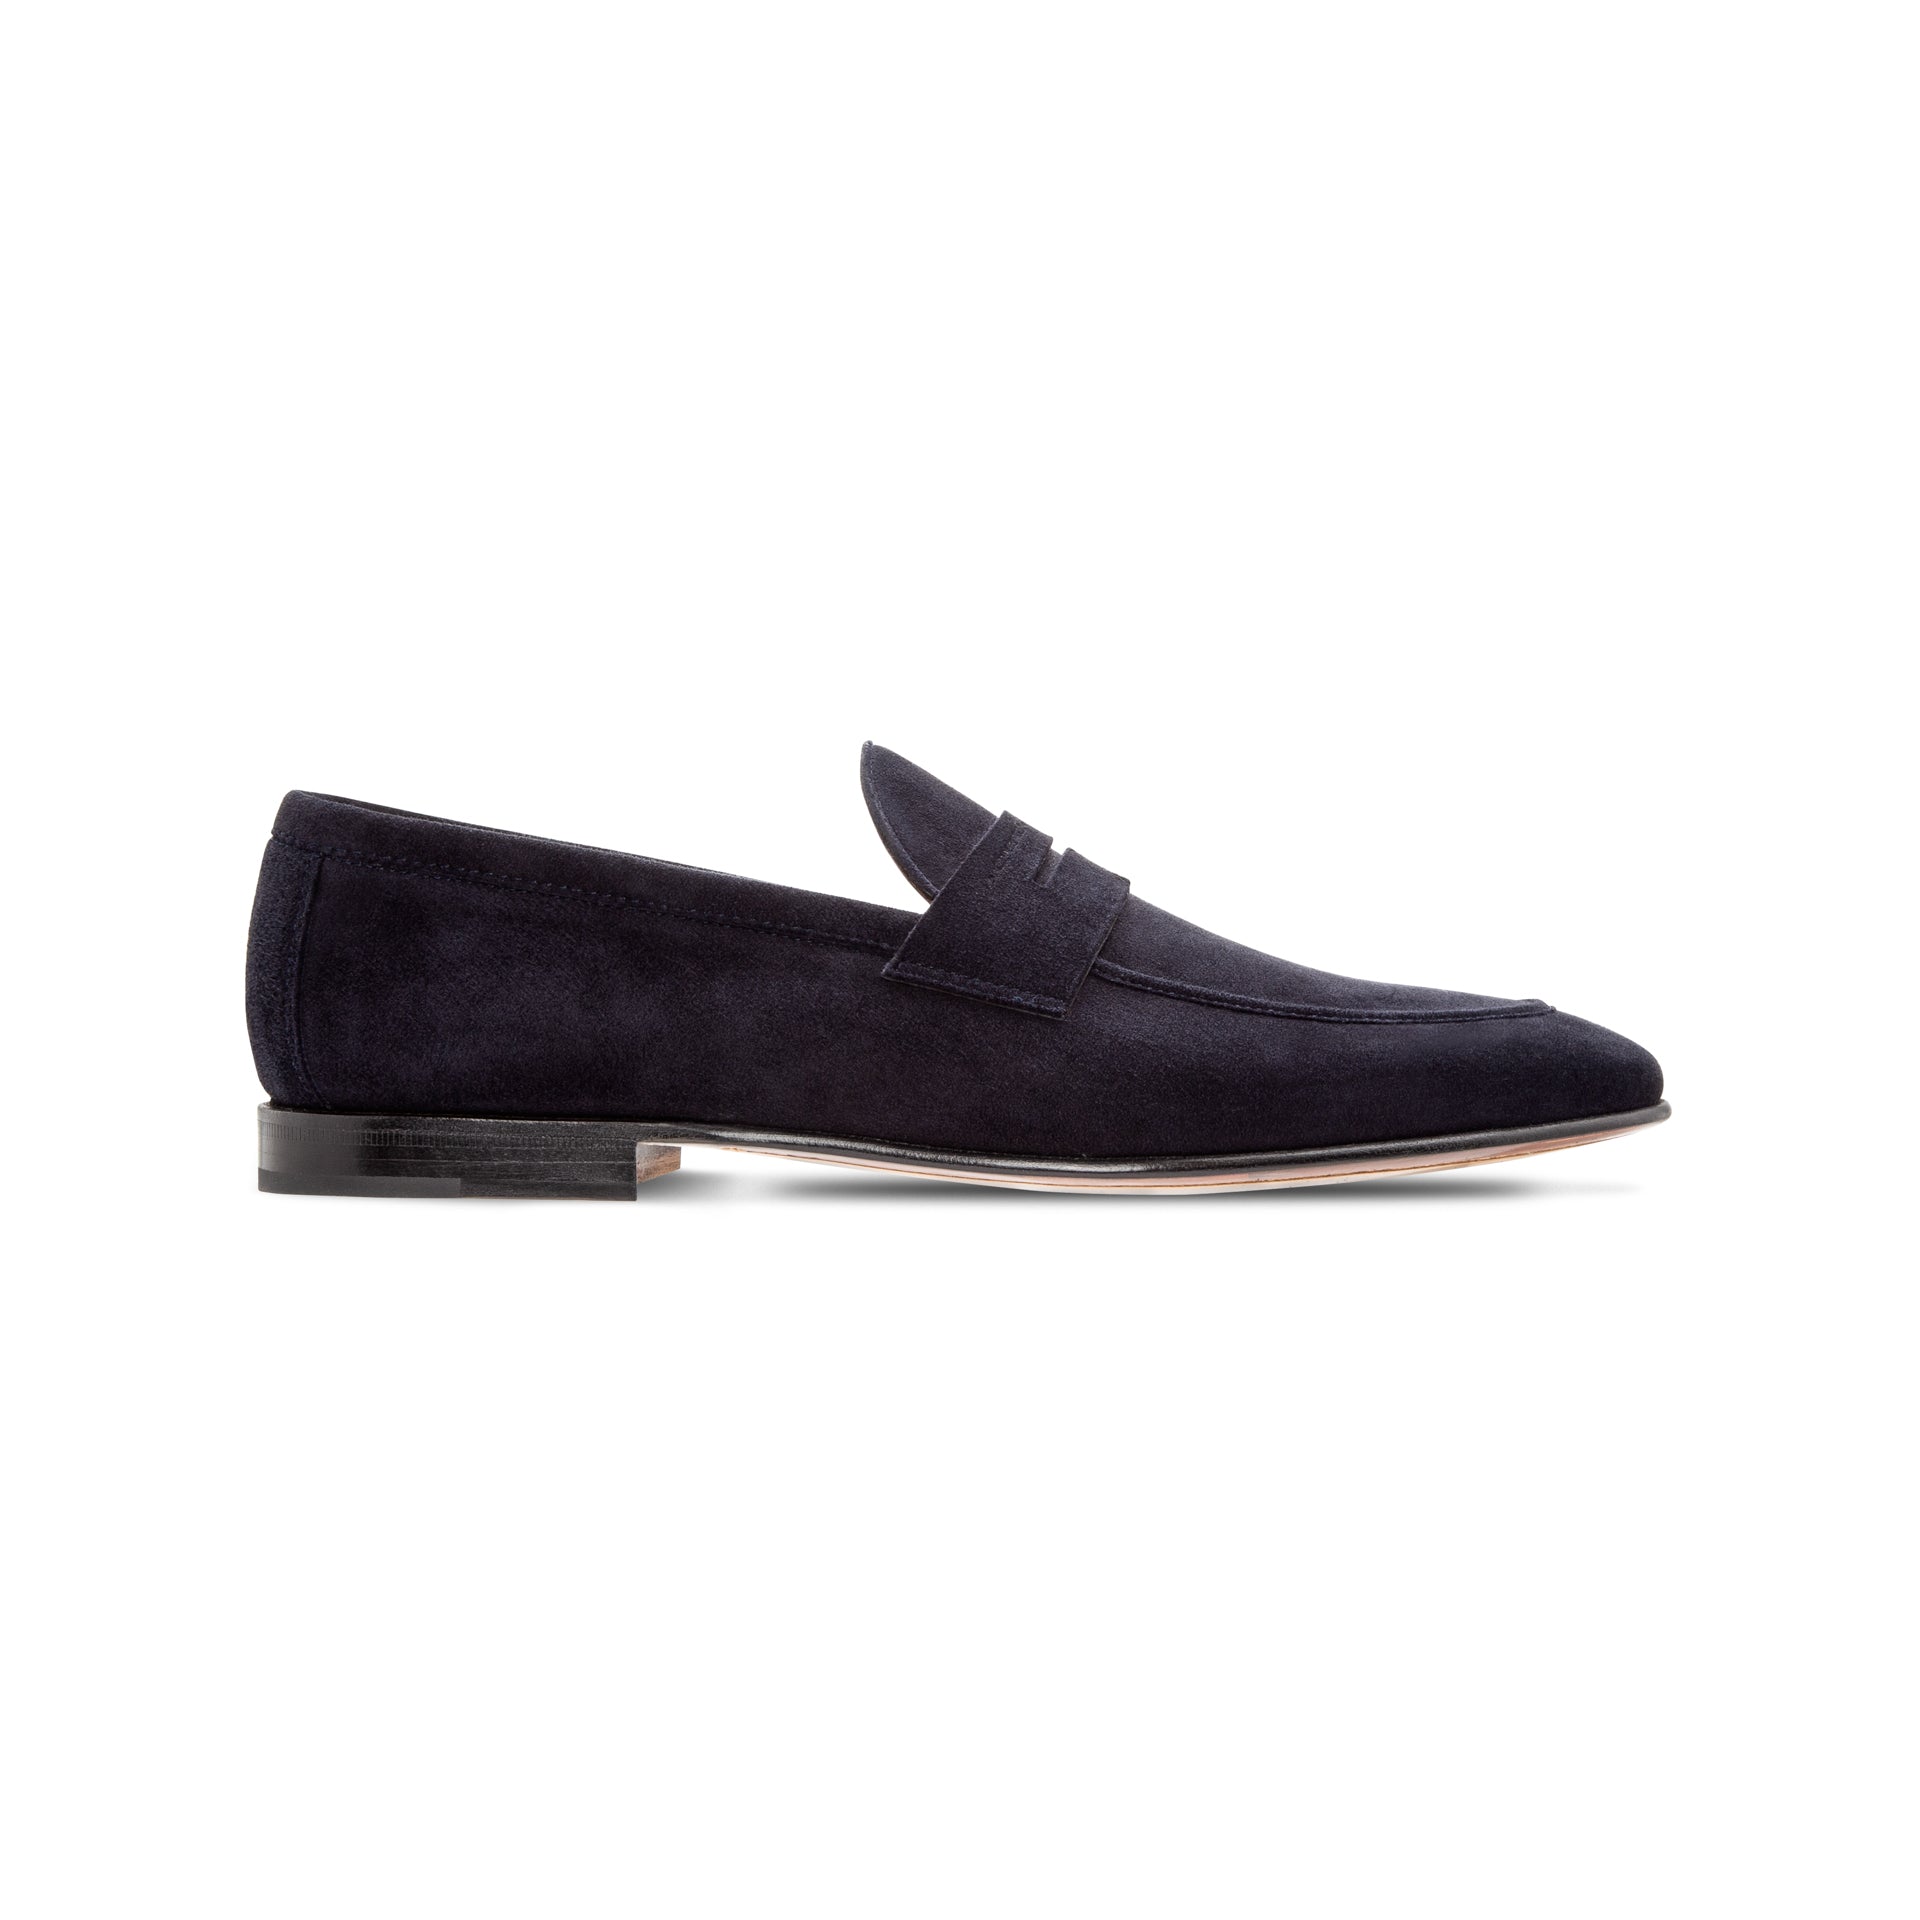 Navy Blue Loafers Shoes VIGO - Moreschi Heritage, made in Italy